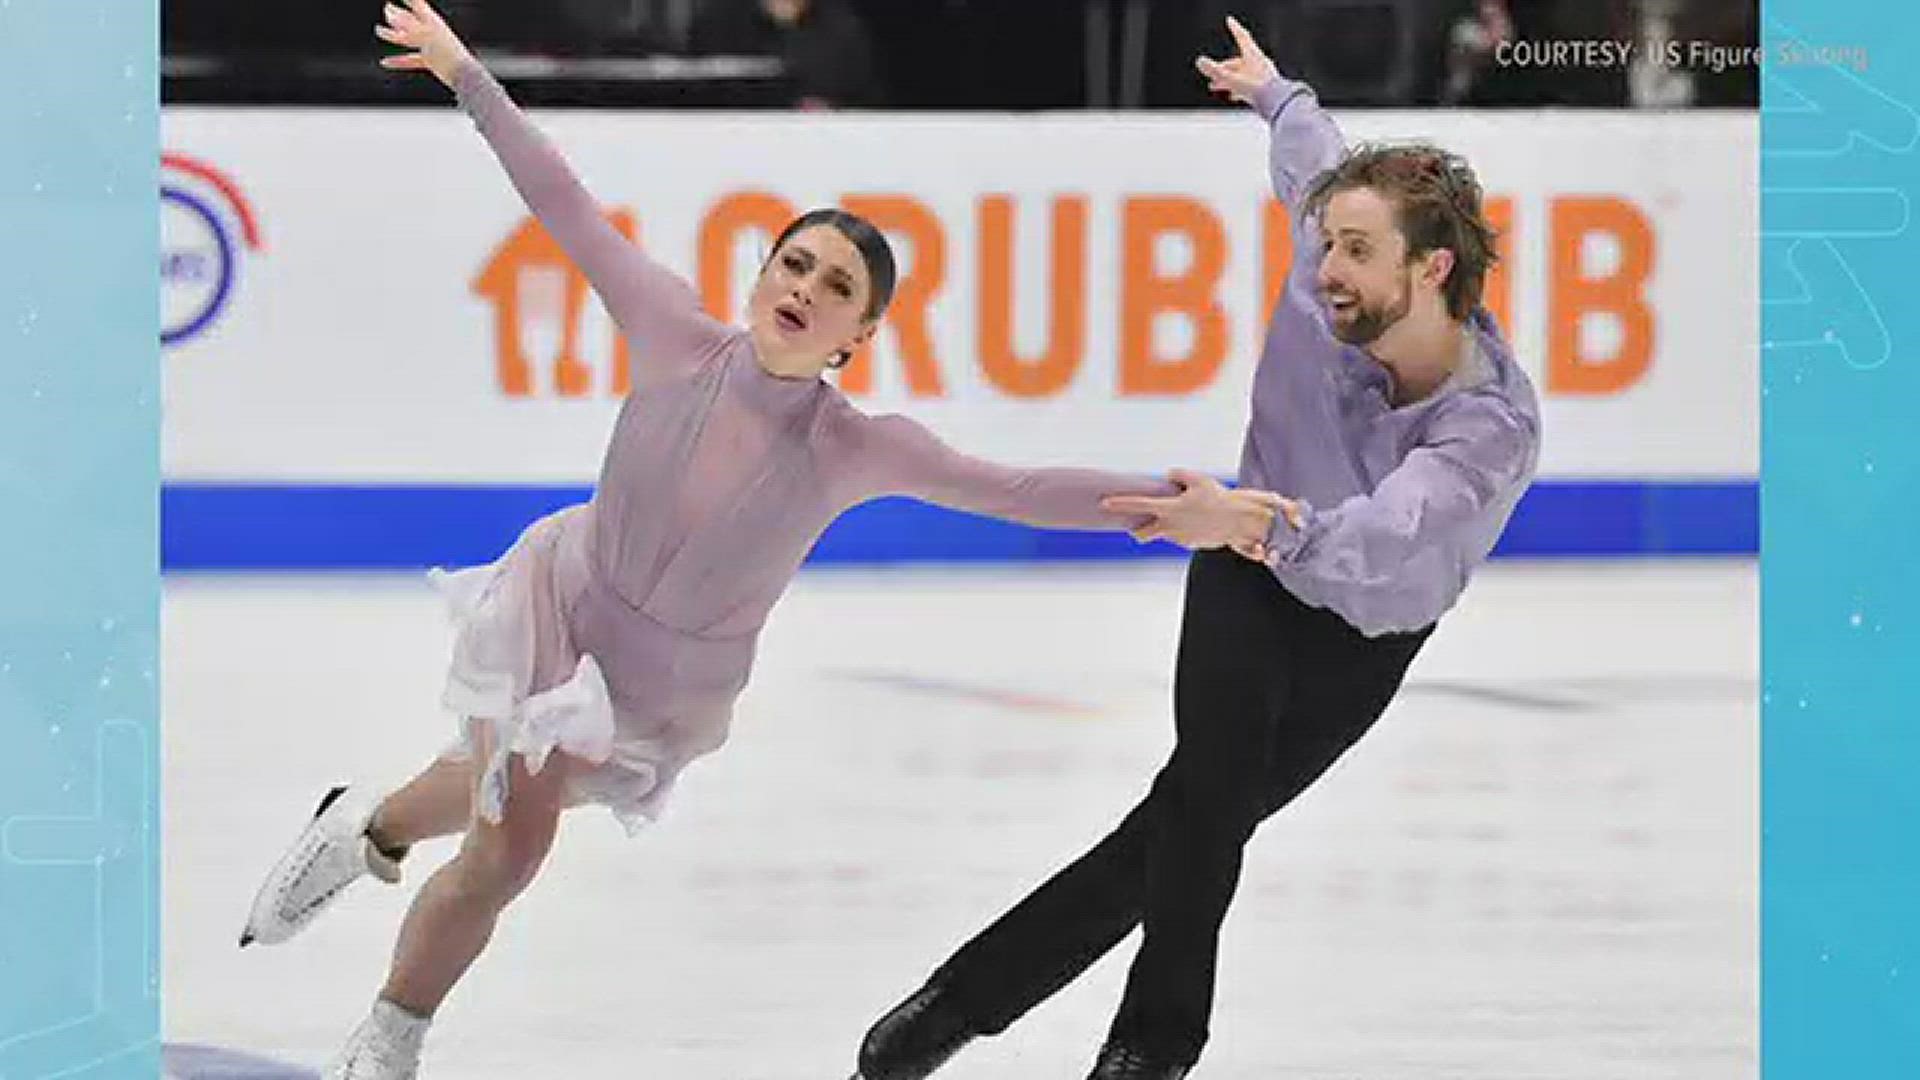 The ice dancer will travel from Montreal to Beijing with her skating partner and 22 other Olympic athletes on Tuesday.